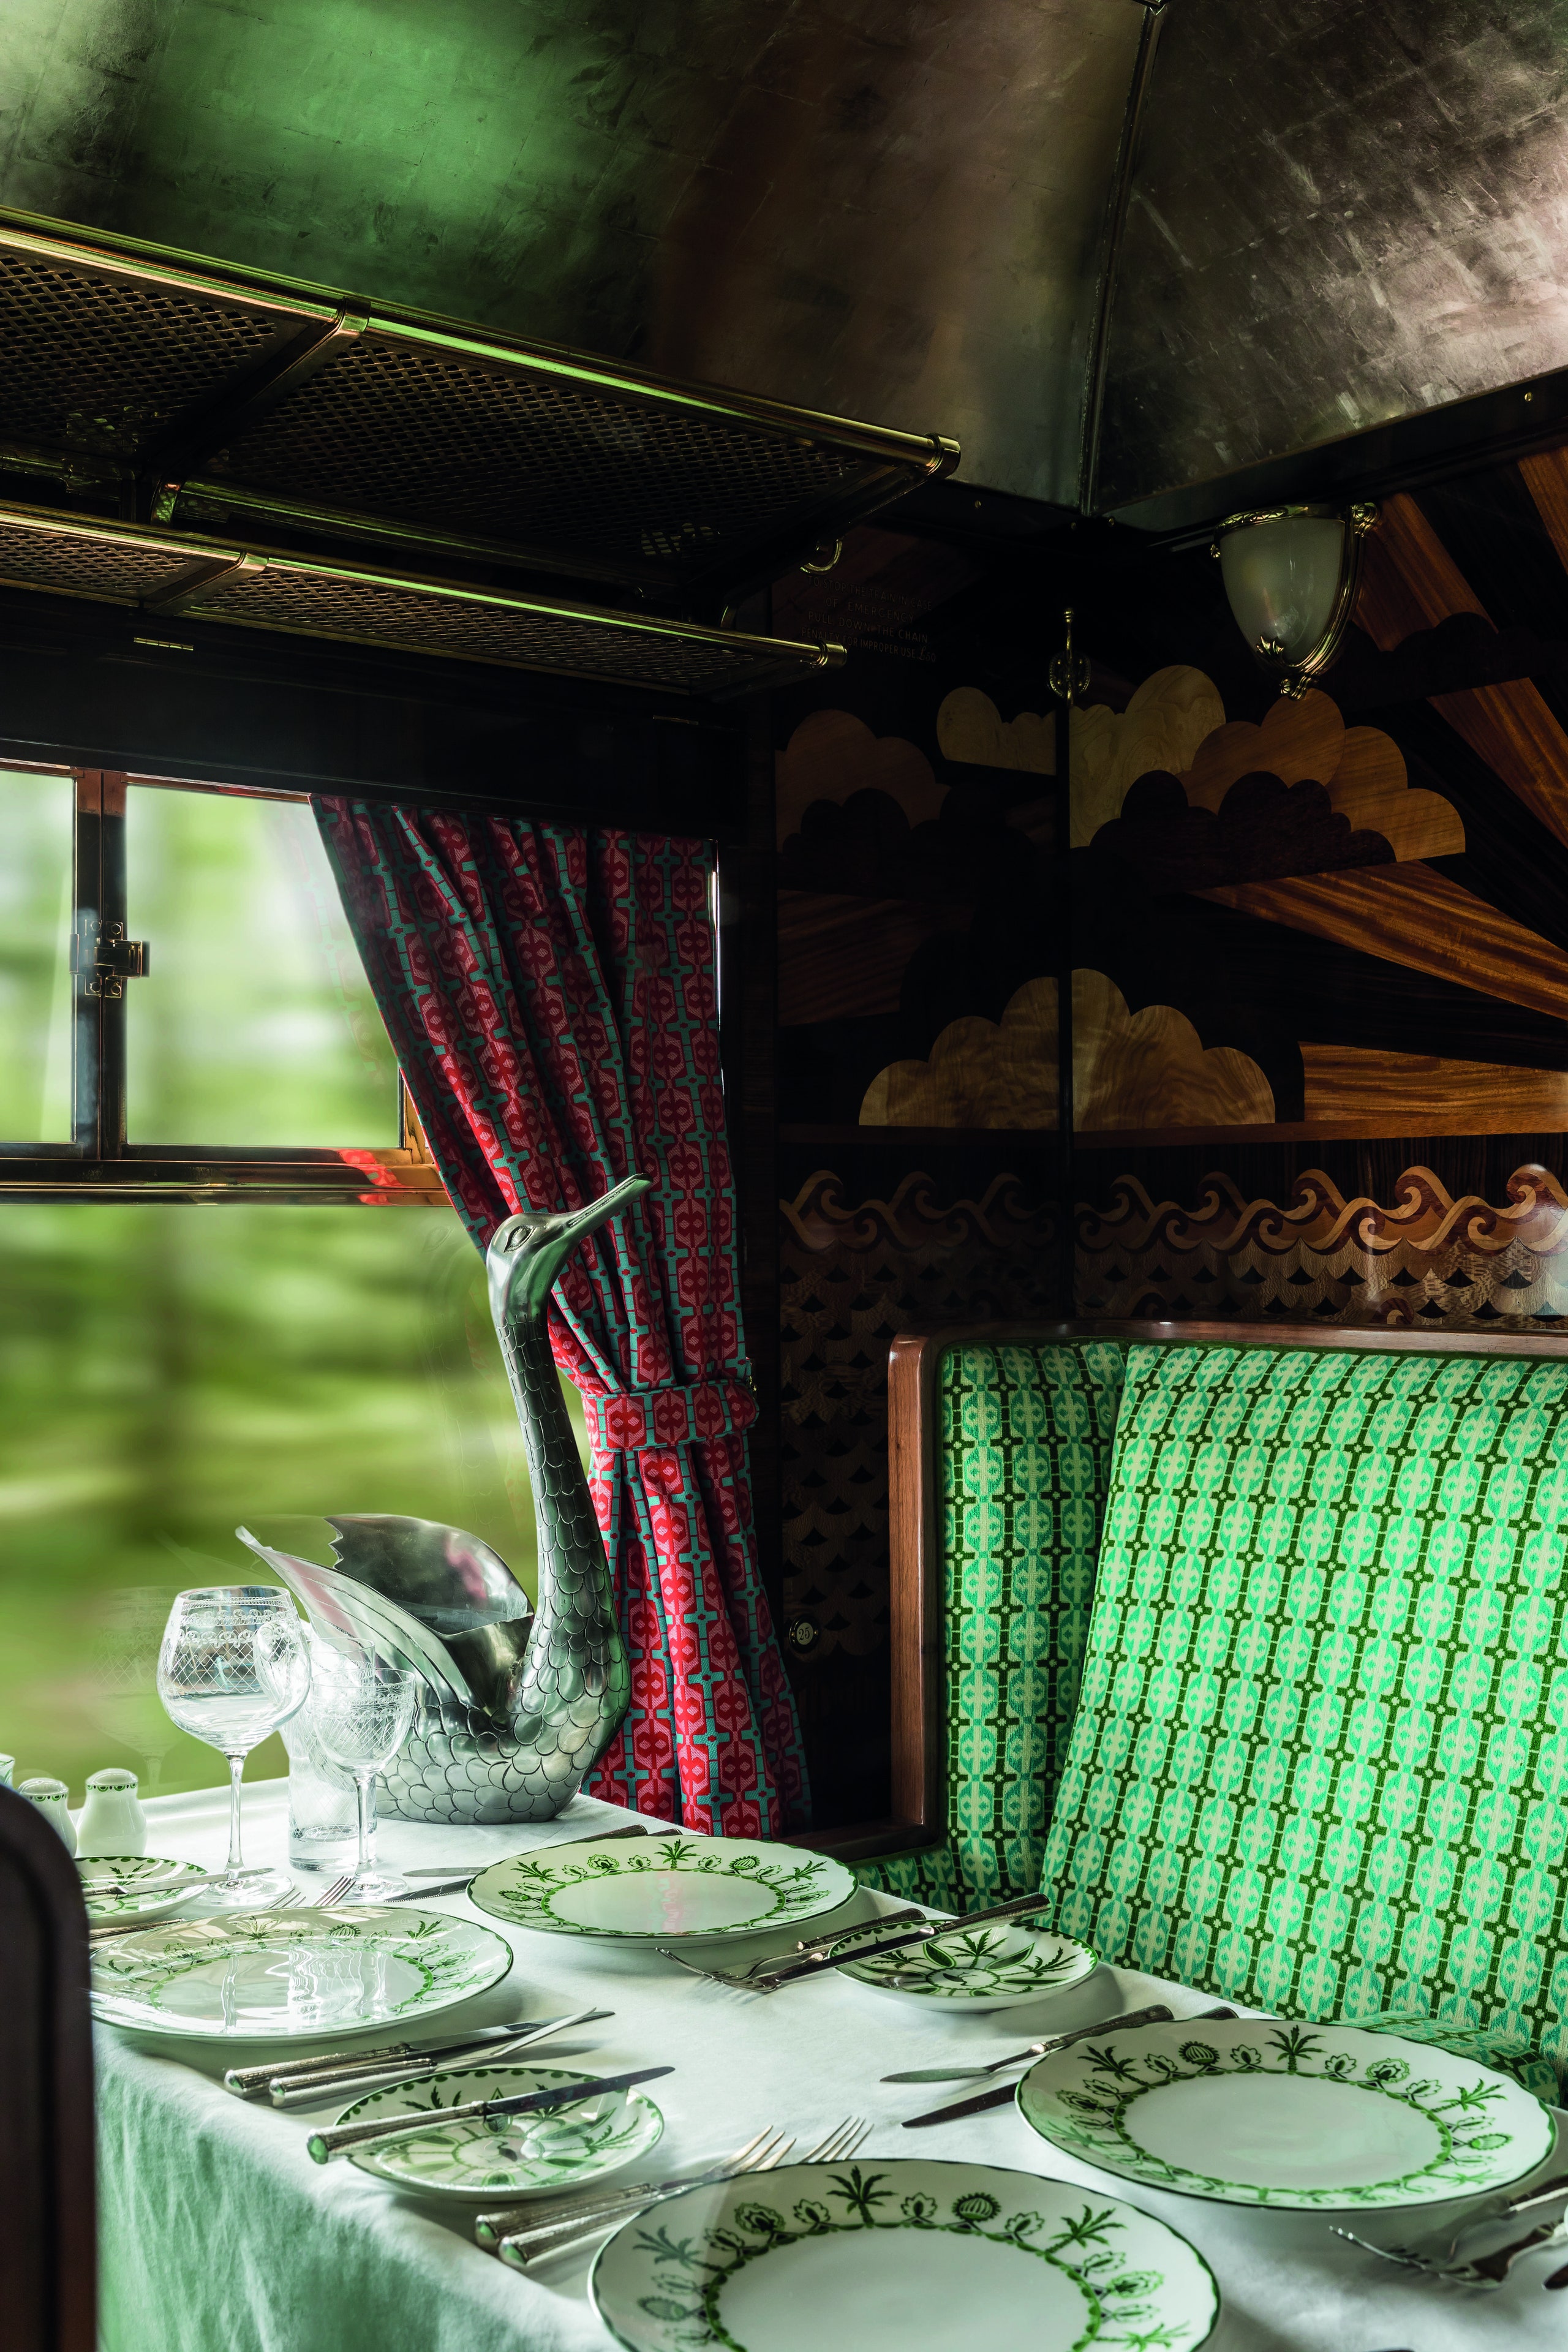 Film Director Wes Anderson has helped redesign a 1950s British train carriage with his classic Art Nouveau style. In...